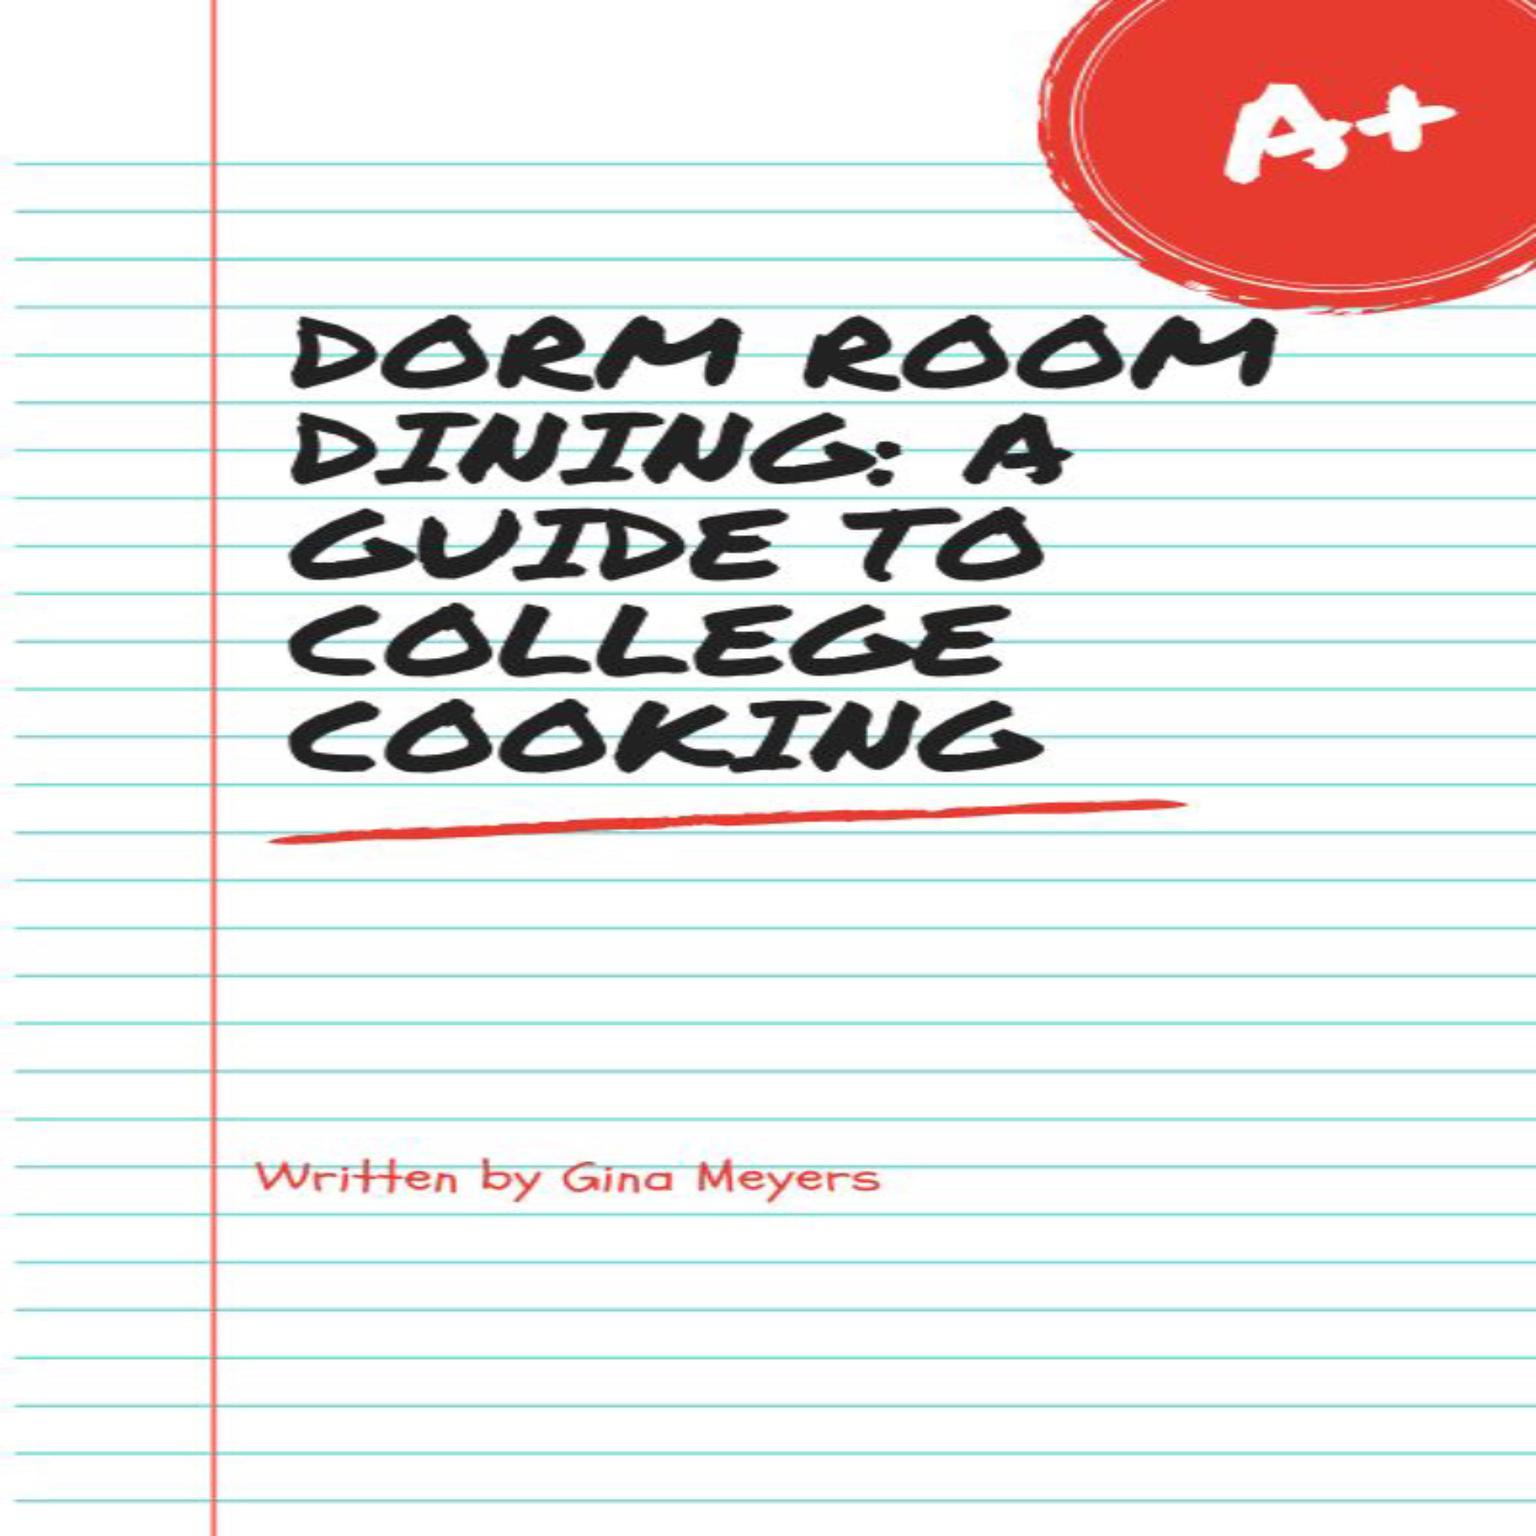 Dorm Room Dining: A Guide To College Cooking Audiobook, by Gina Meyers